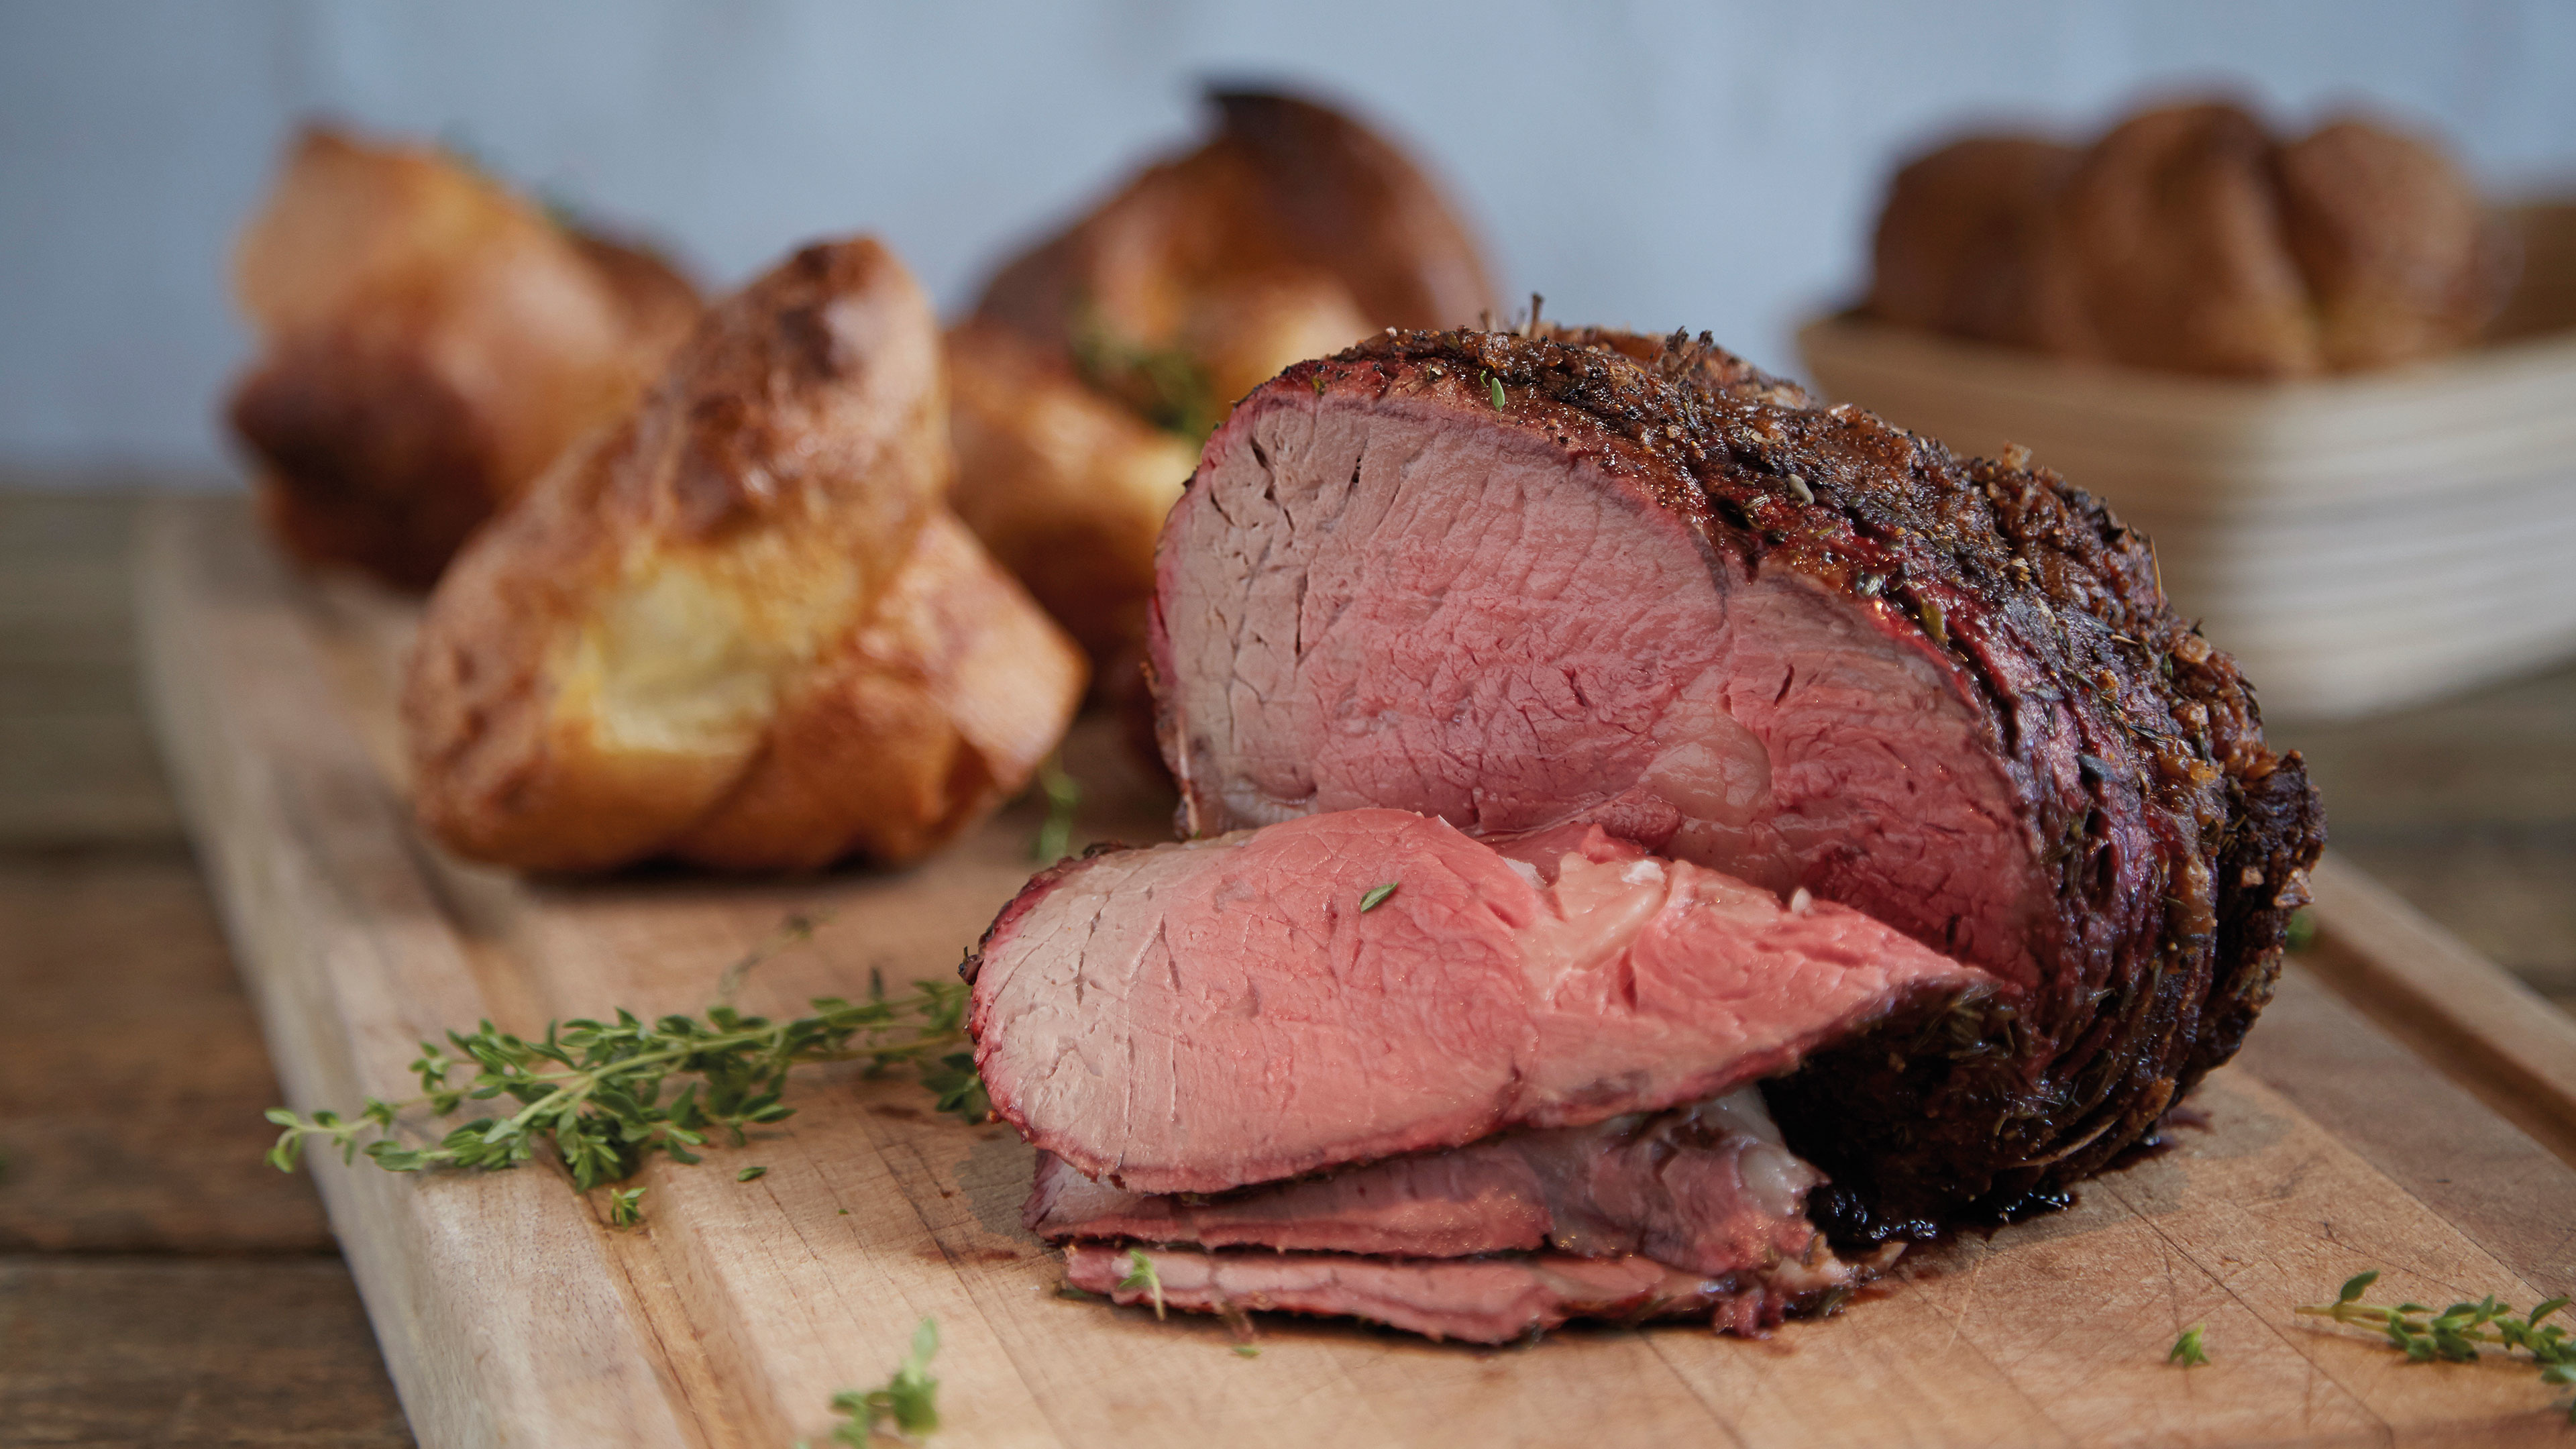  Roast Beef and Yorkshire puddings 


